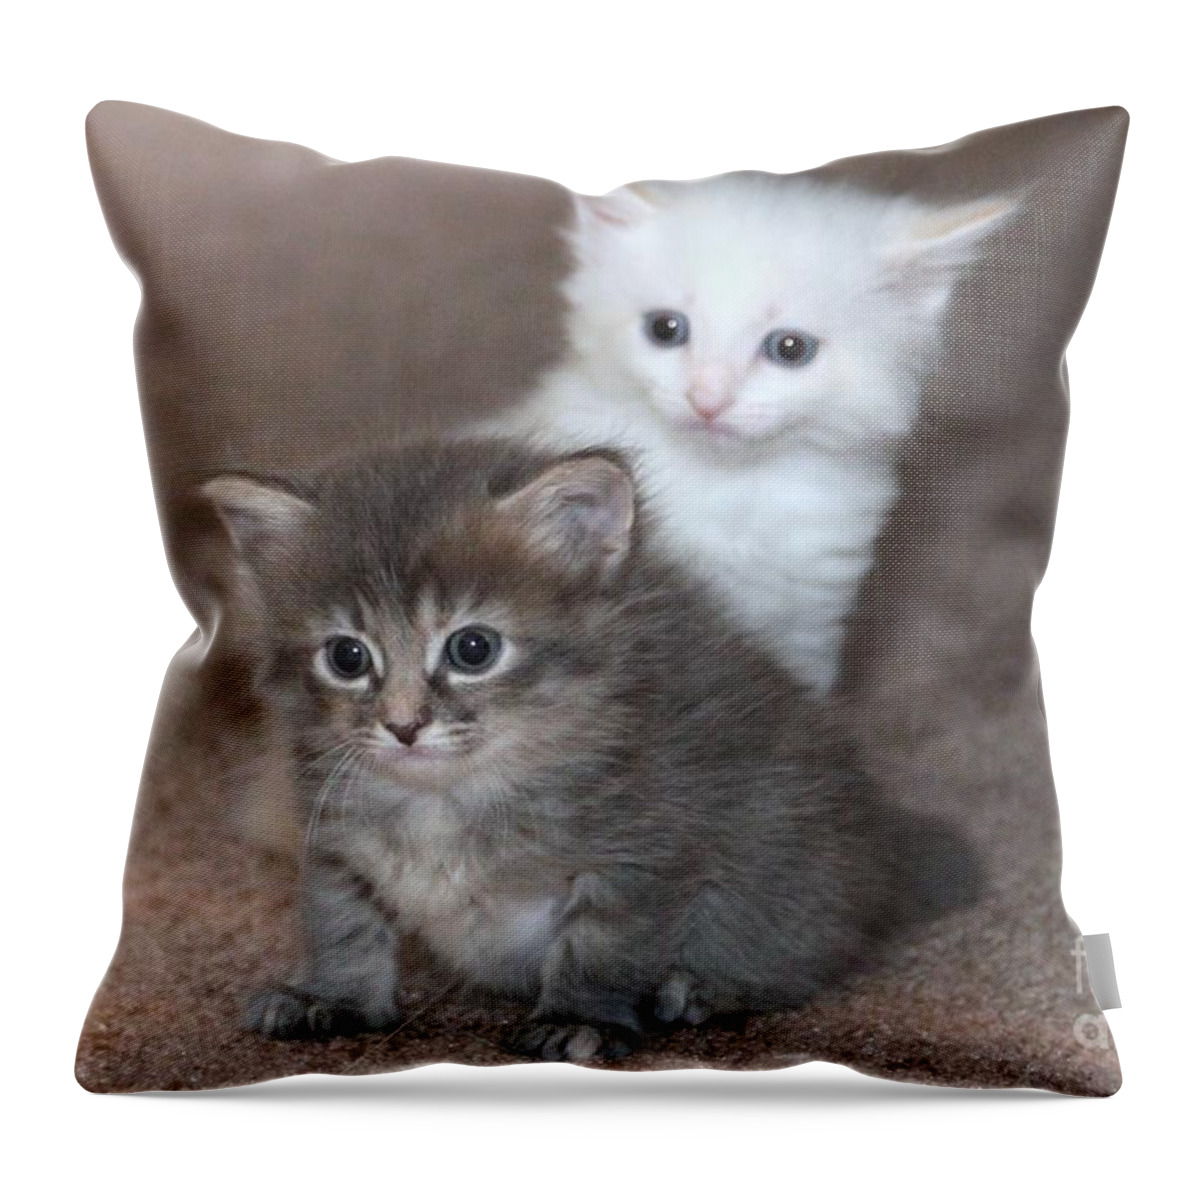 Cat Throw Pillow featuring the photograph Kittens 13 by Michelle Powell